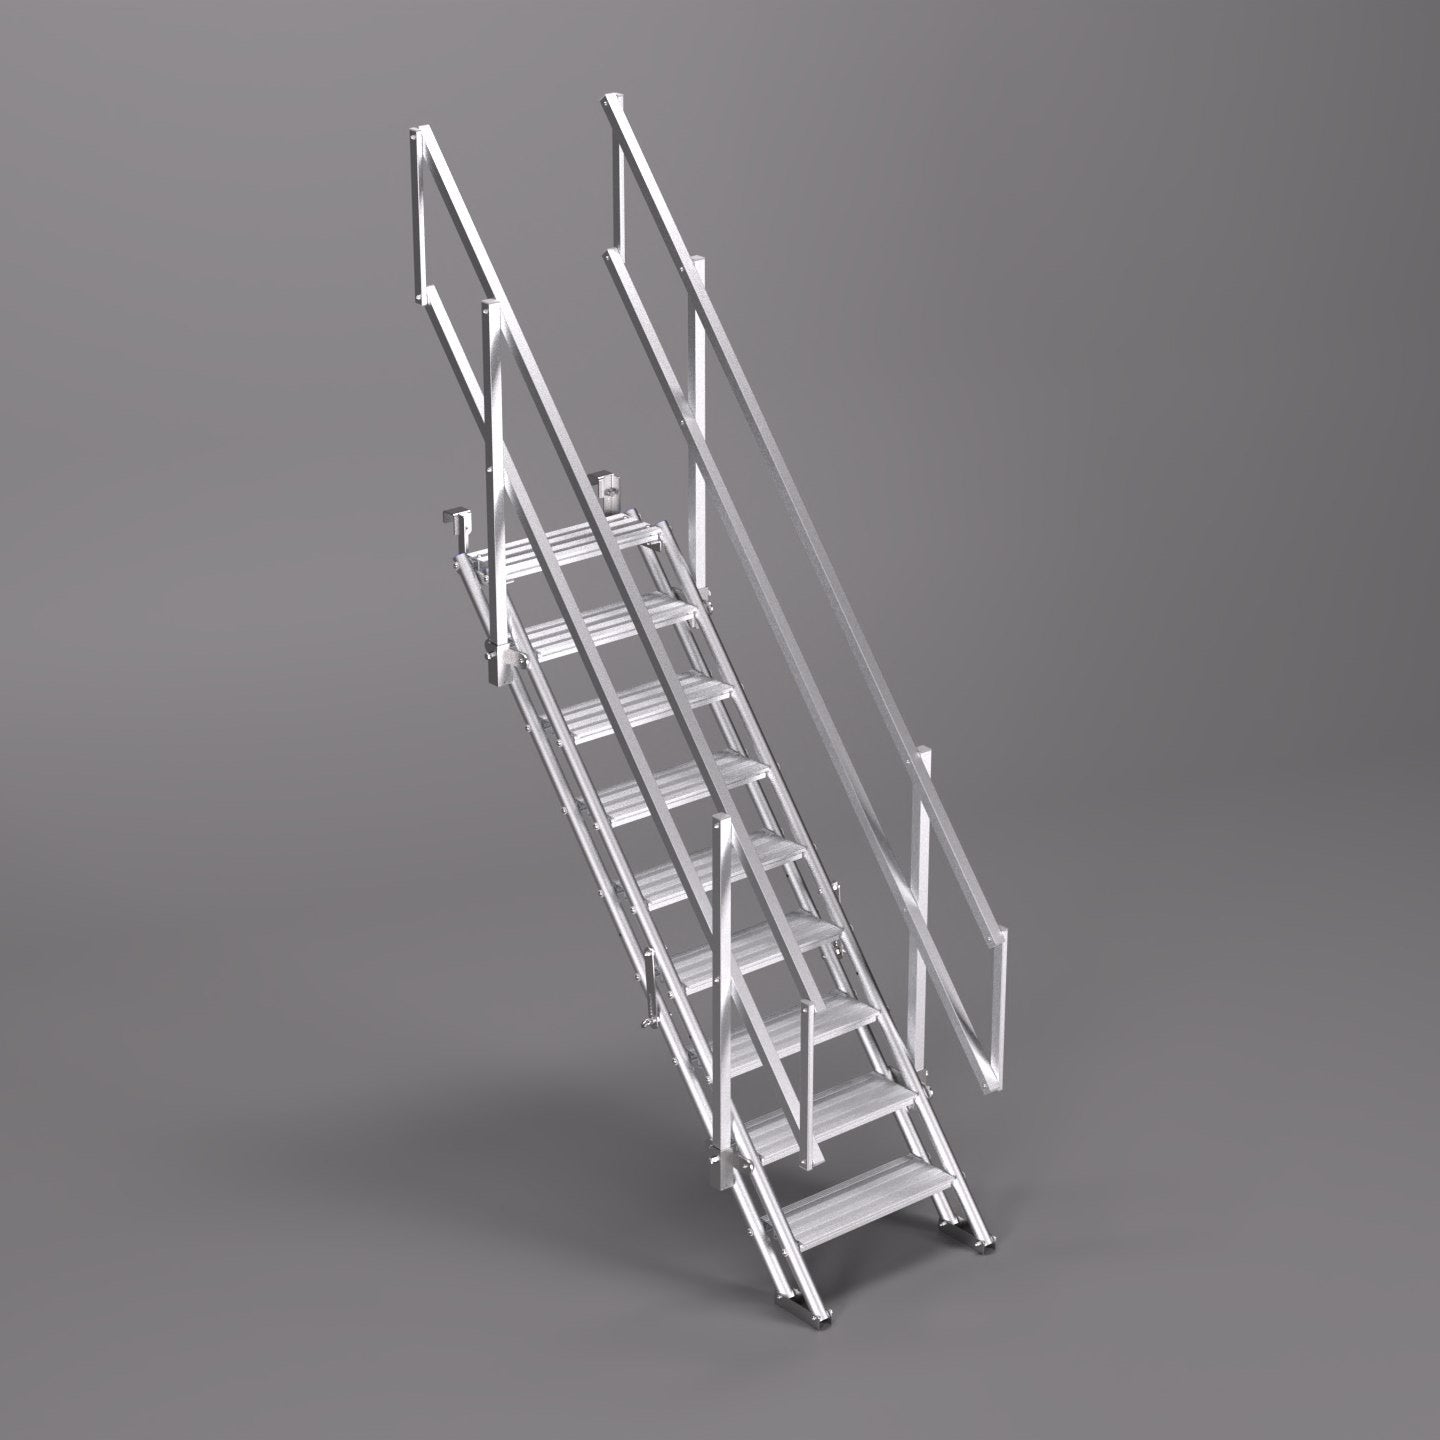 An image of a 2.0m ALTO Universal Stair Set with the scaffold tube hook option.